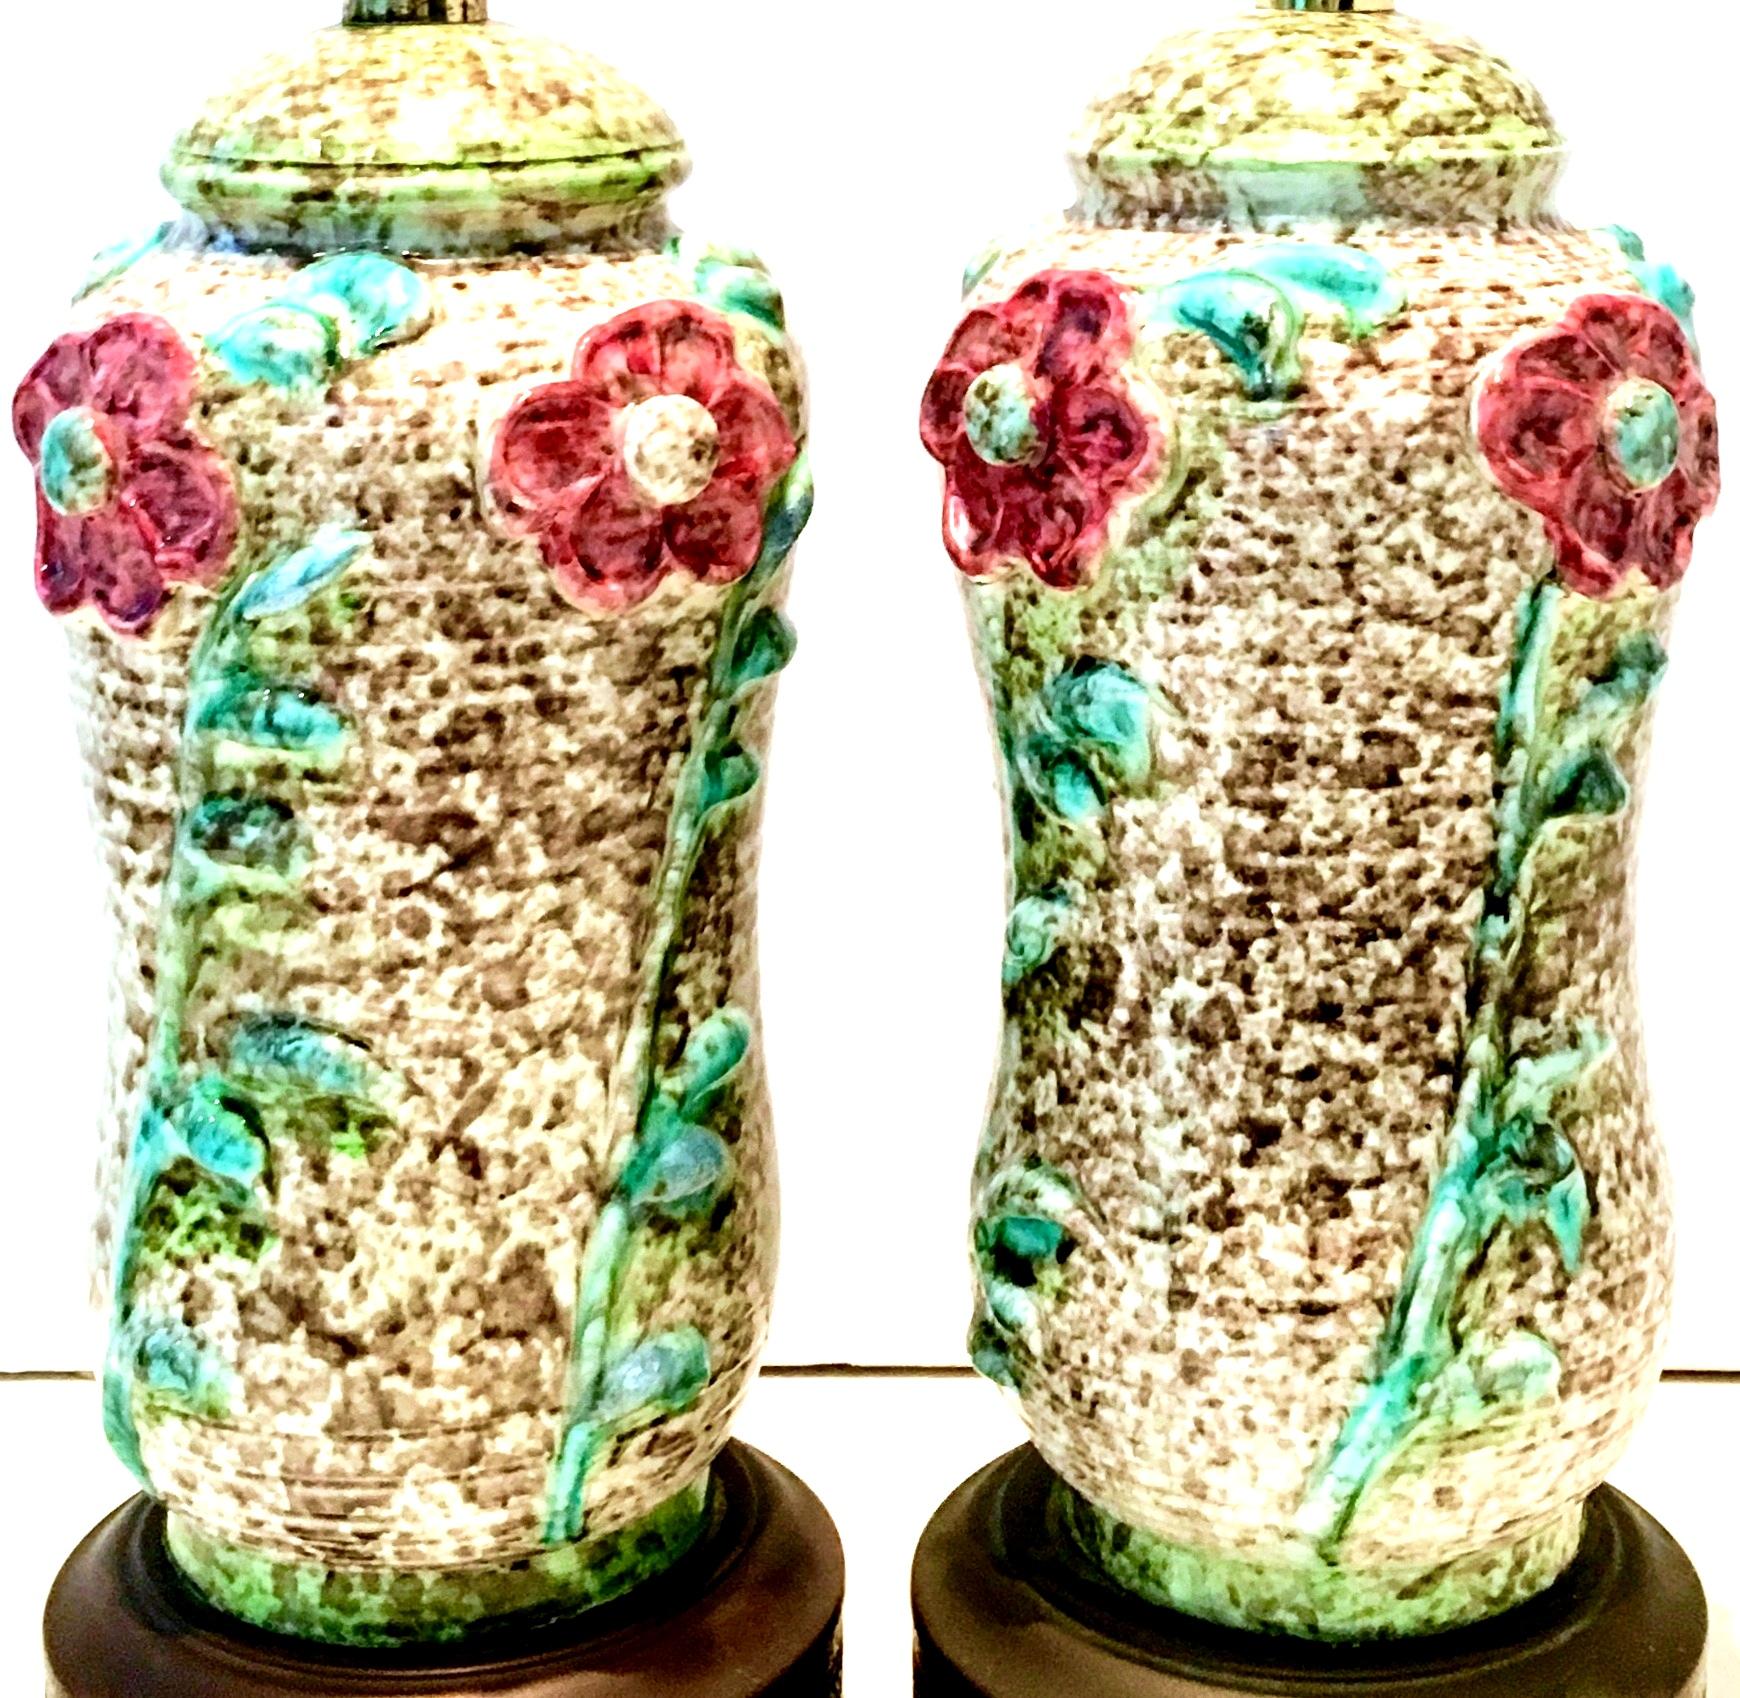 American Mid-20th Century Pair of Ceramic Glaze and Gilt Brass Floral Table Lamps For Sale